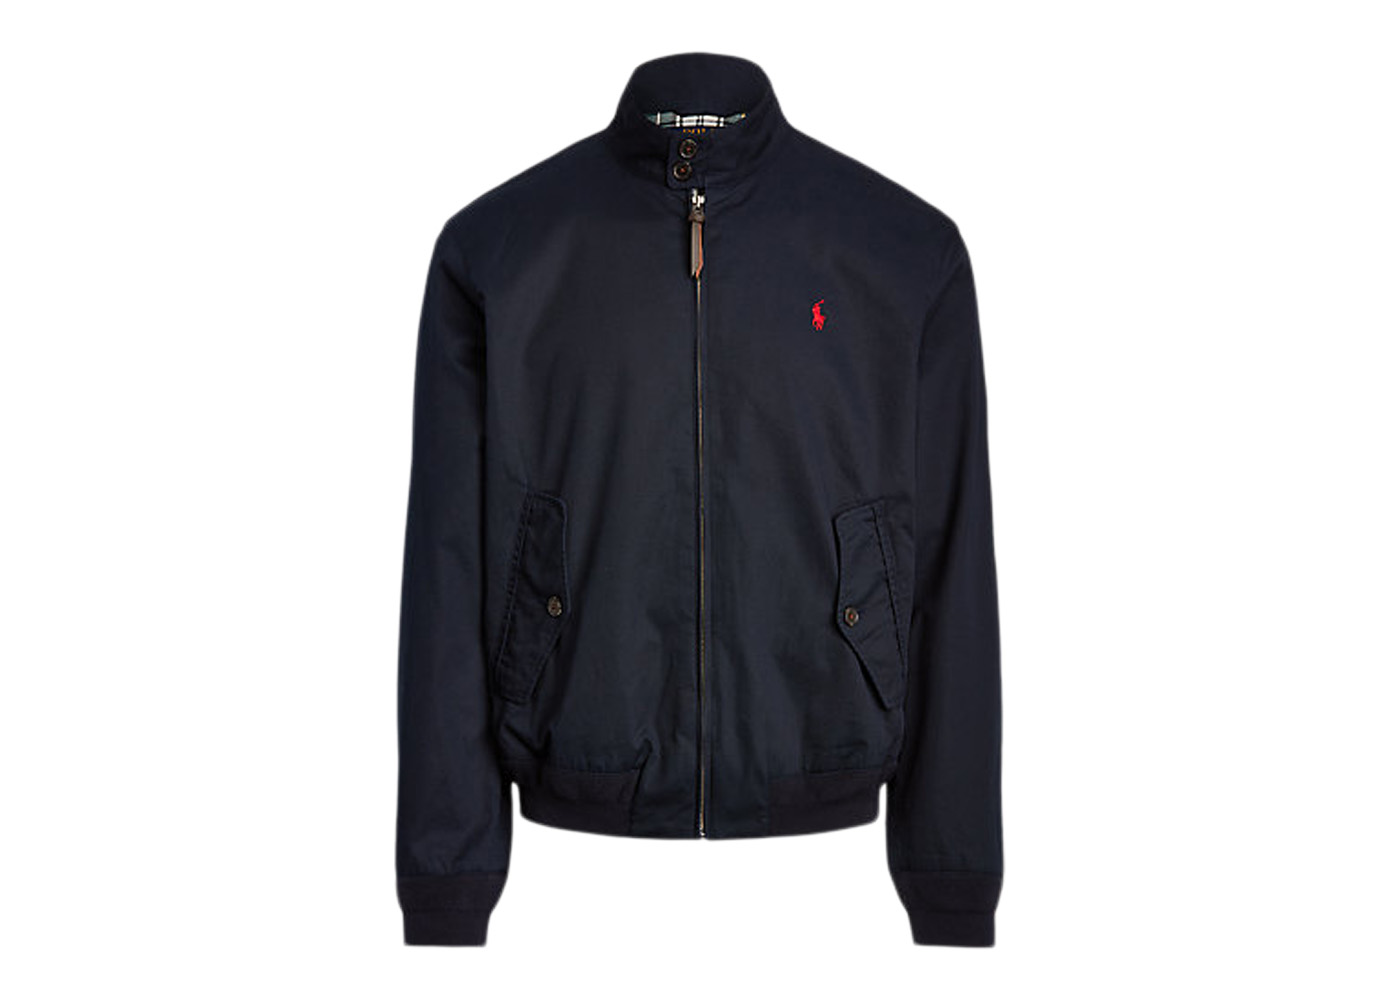 Polo Ralph Lauren The Packable Hooded Jacket - 349 €. Buy Padded jackets  from Polo Ralph Lauren online at Boozt.com. Fast delivery and easy returns